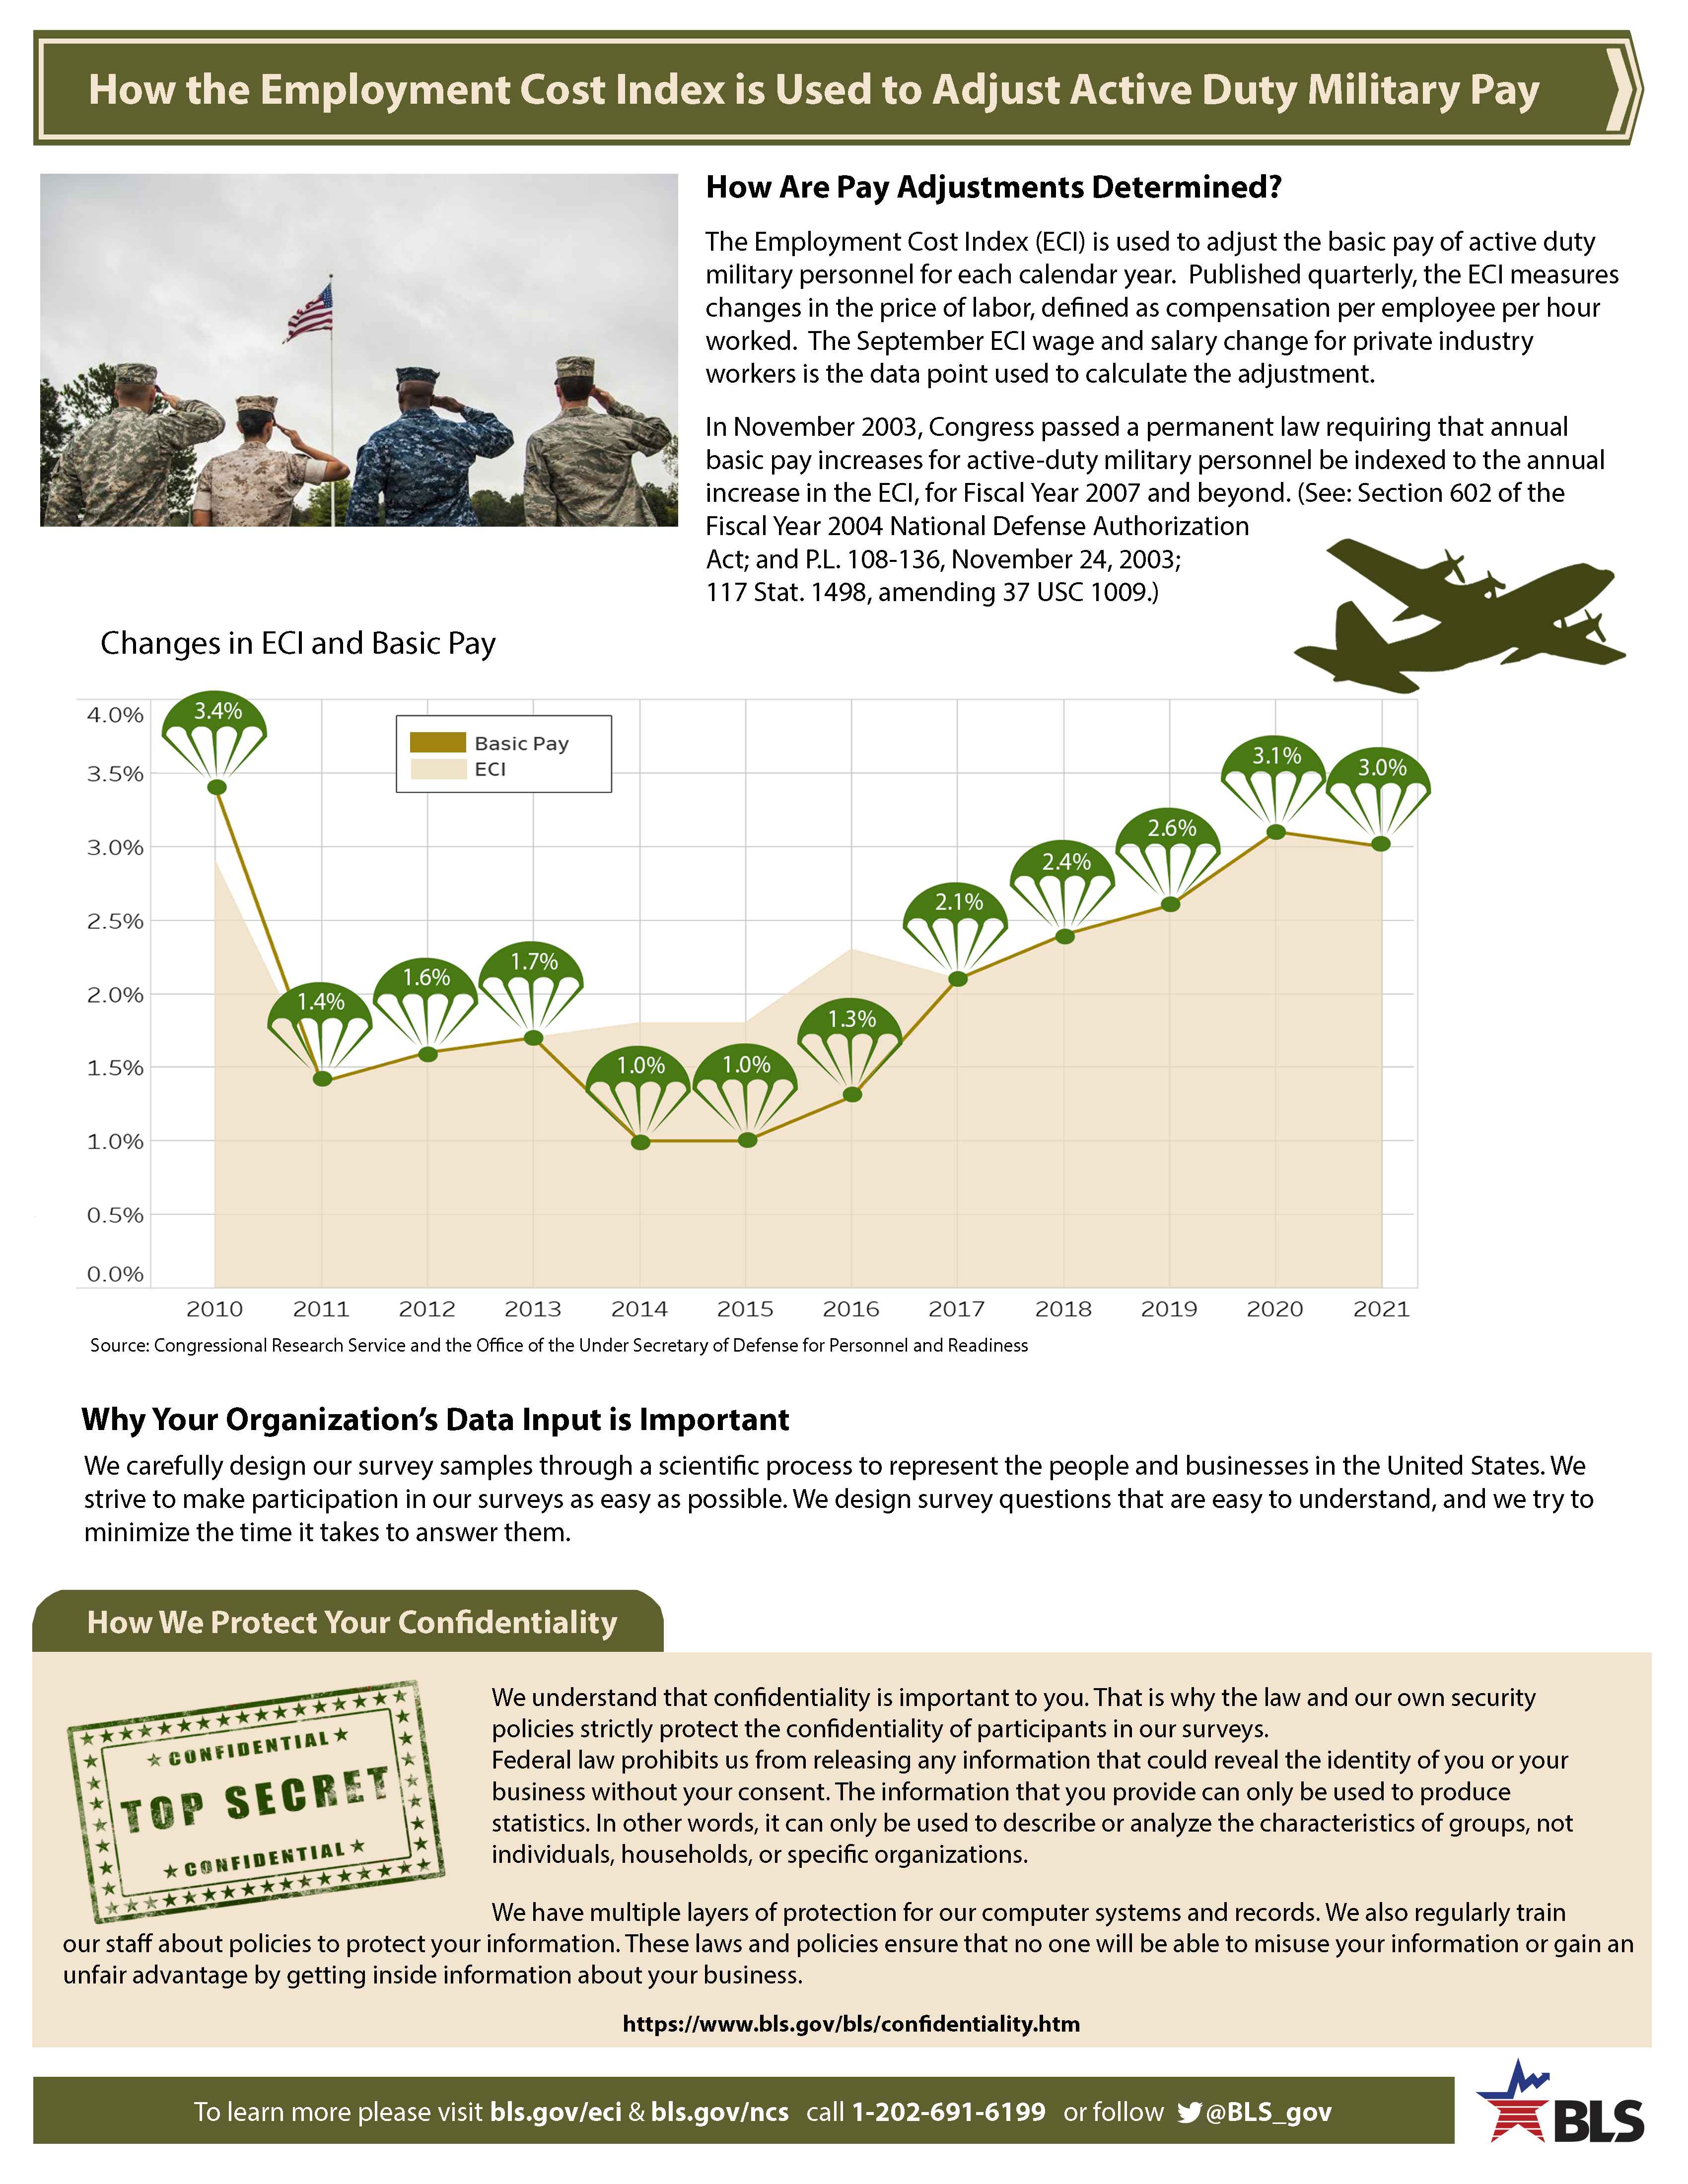 How the Employment Cost Index is Used to Adjust Active Duty Military Pay